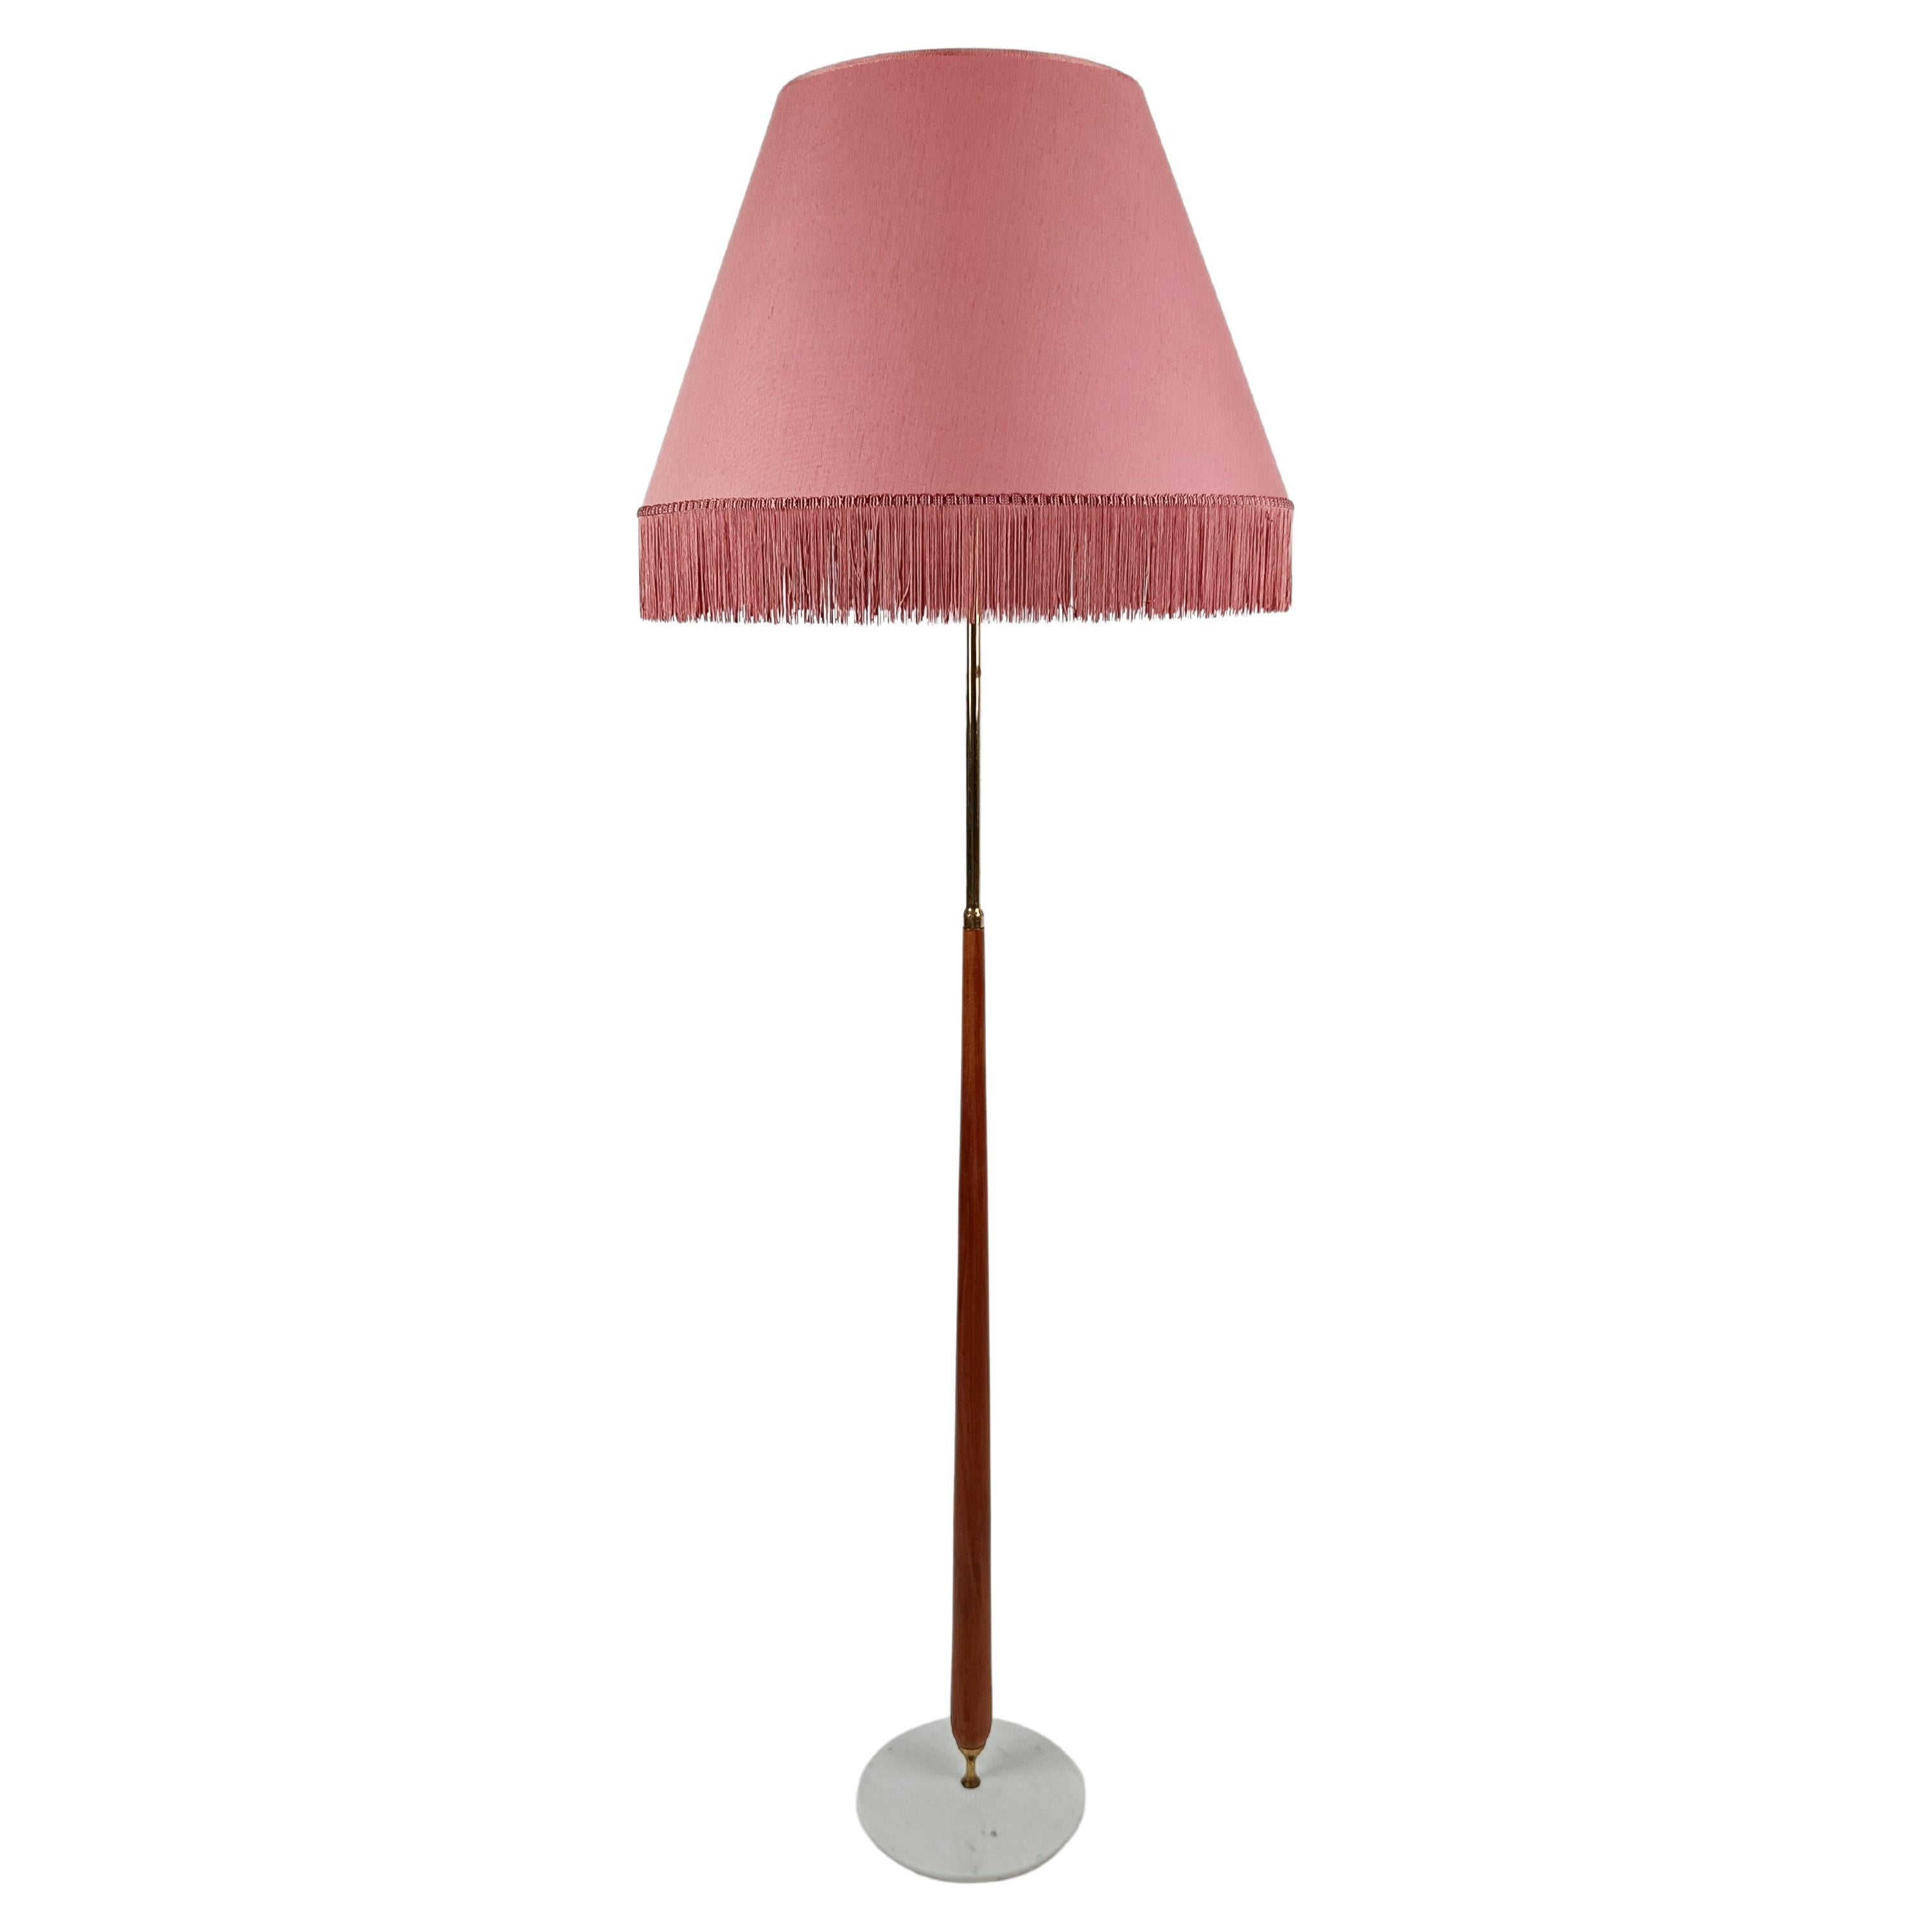 Italian Mid Century Floor Lamp in Solid Wood, Carrara Marble and Brass, 1950s For Sale